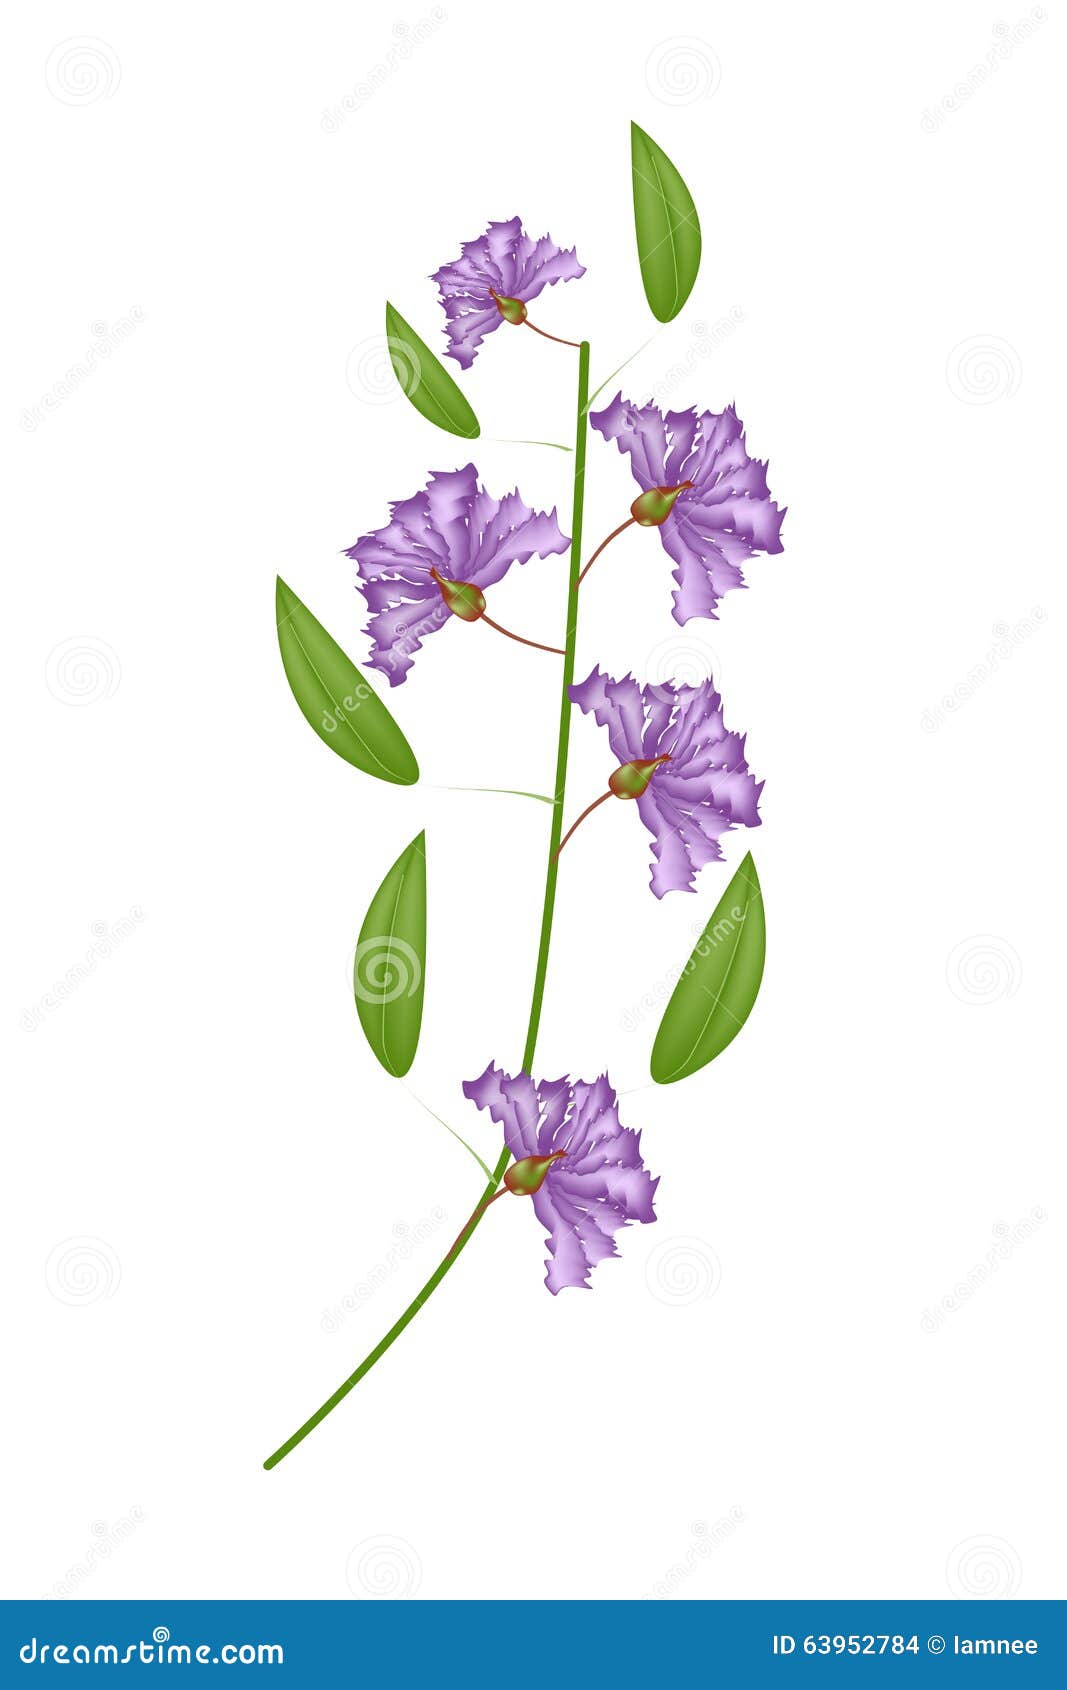 Bunch of Purple Crape Myrtle Flowers on White Background Stock Vector ...